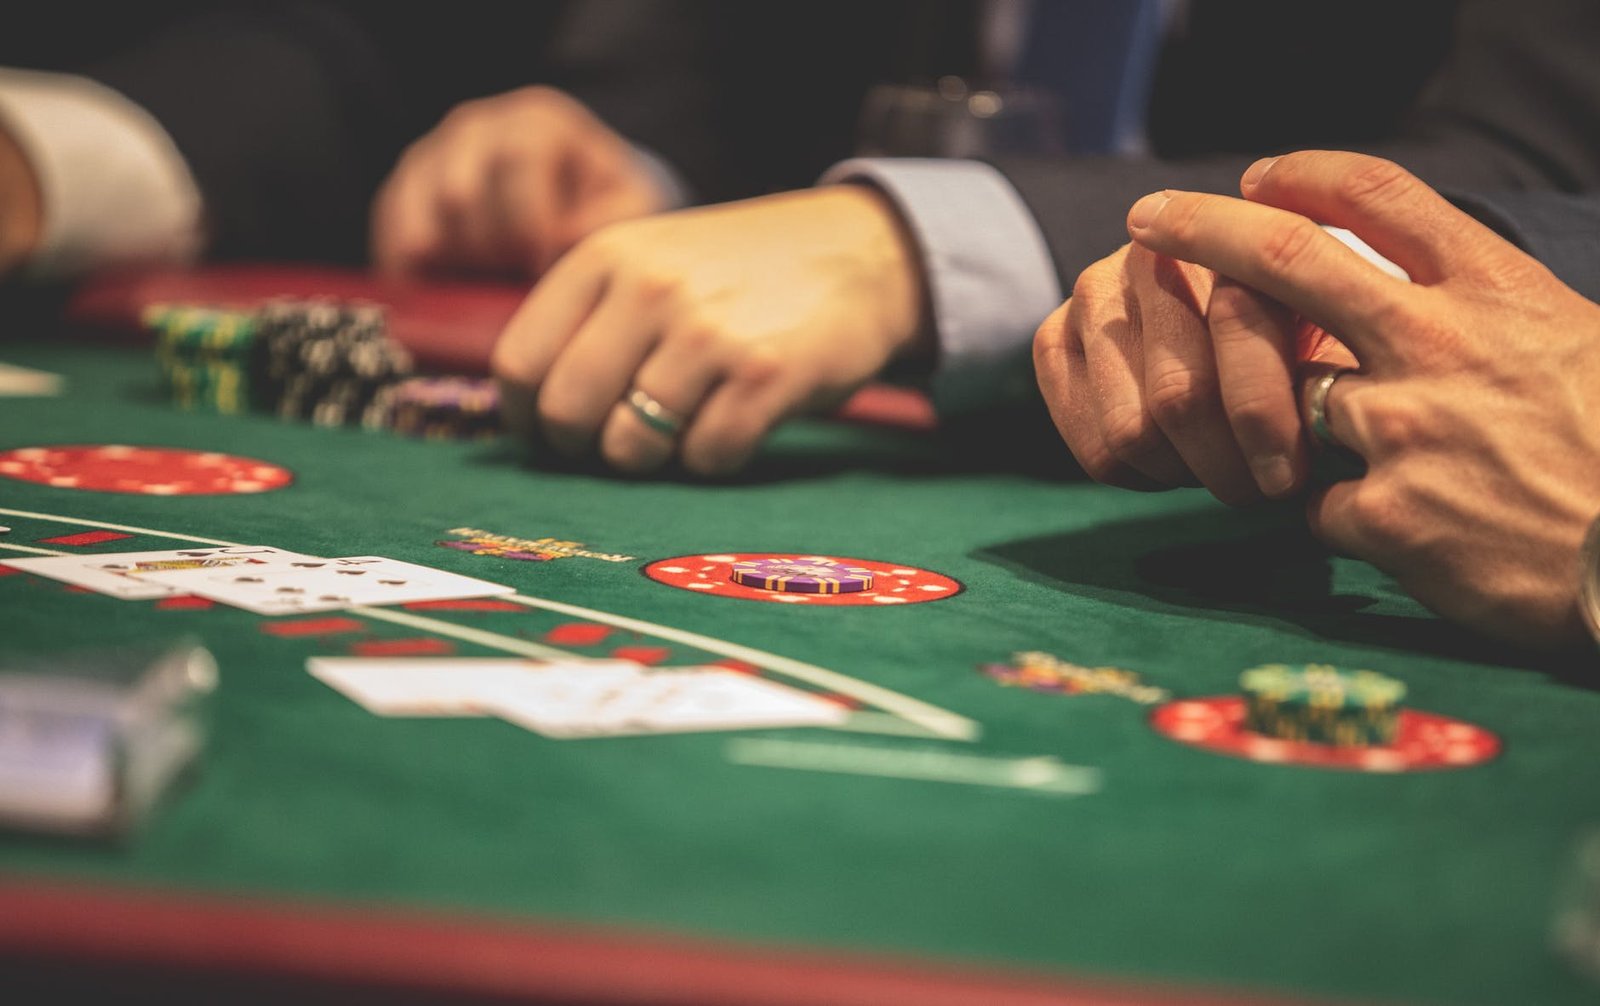 Online Gambling in India: What New to Expect in 2021 - India CSR Network